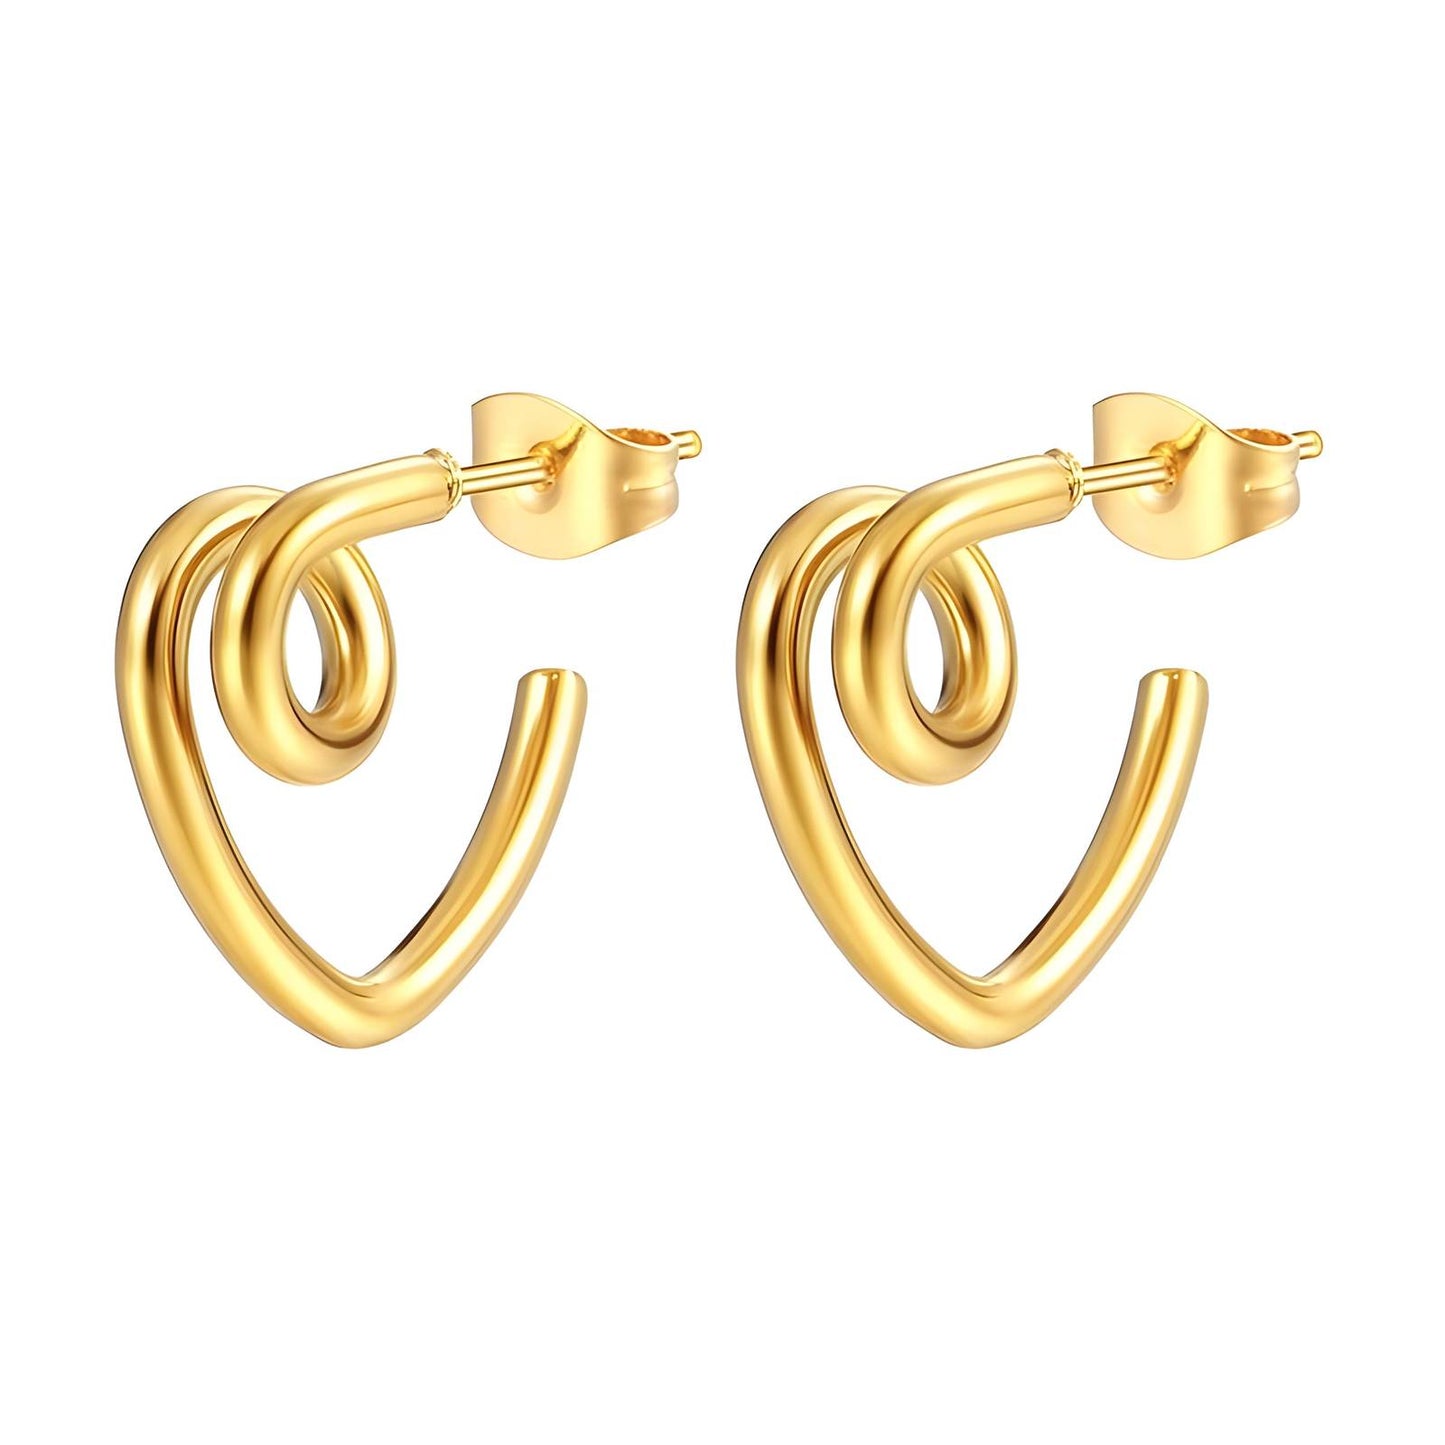 Golden Twists of Love: Heart-Shaped Wire Earrings for Chic Style